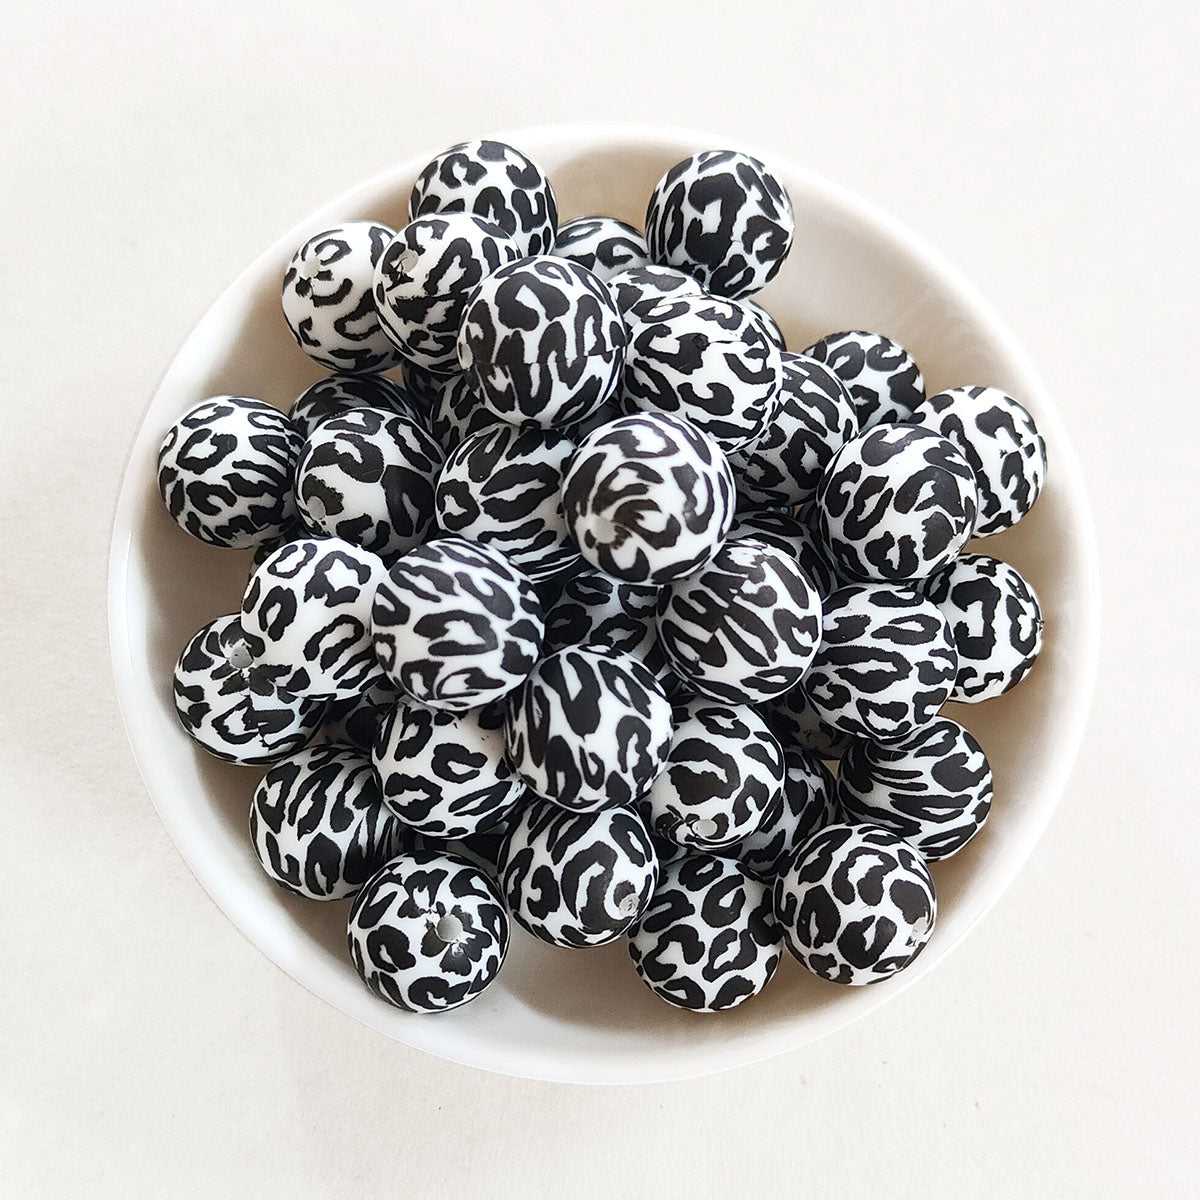 12/15mm Black Leopard Silicone Beads - Round - #3